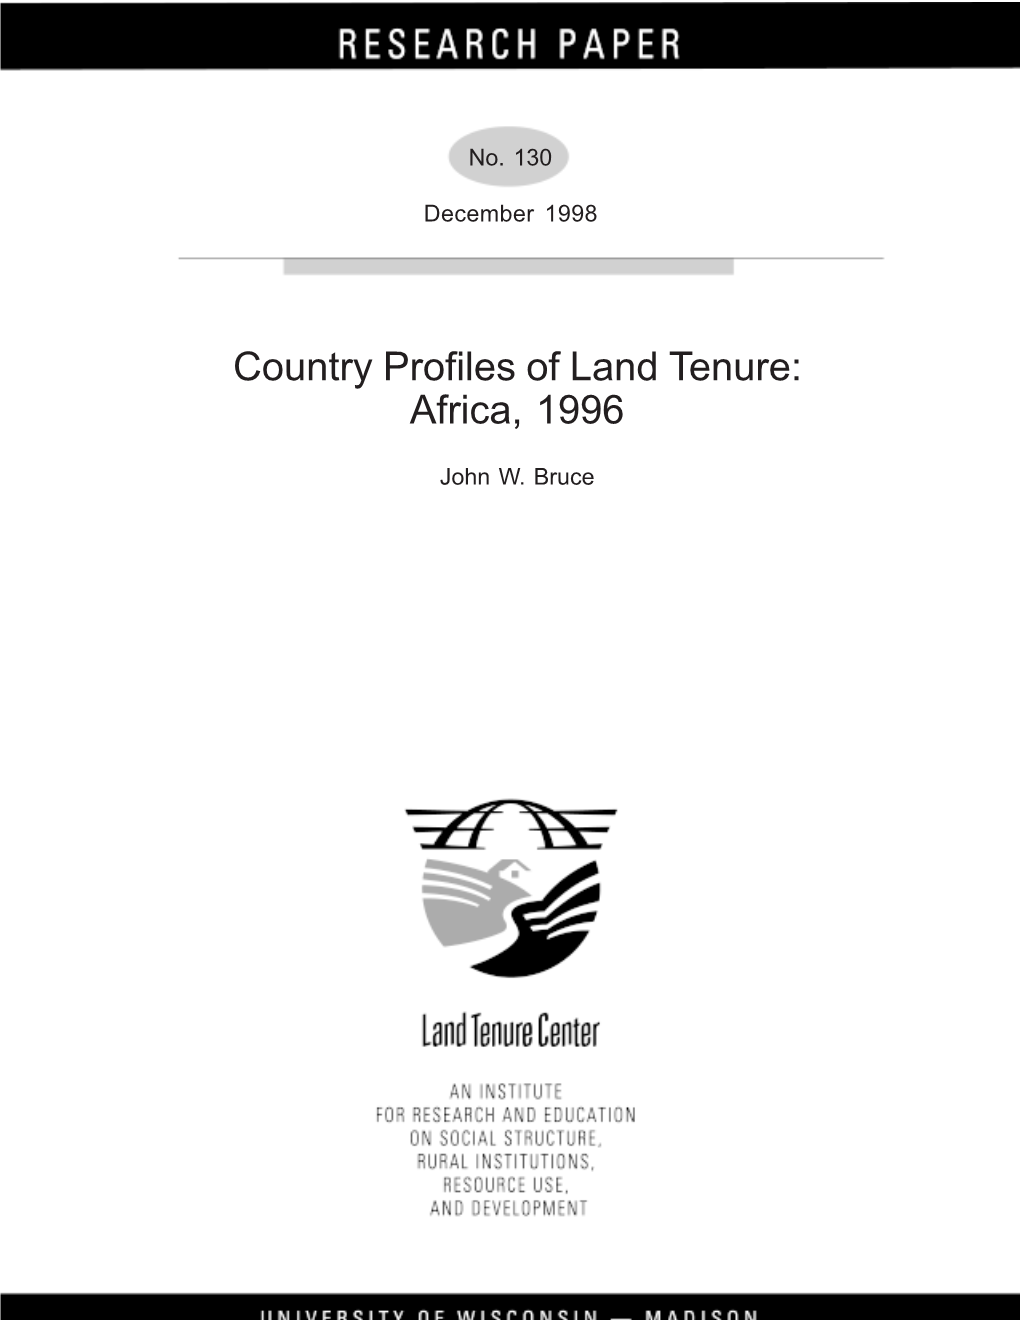 Country Profiles of Land Tenure: Africa, 1996